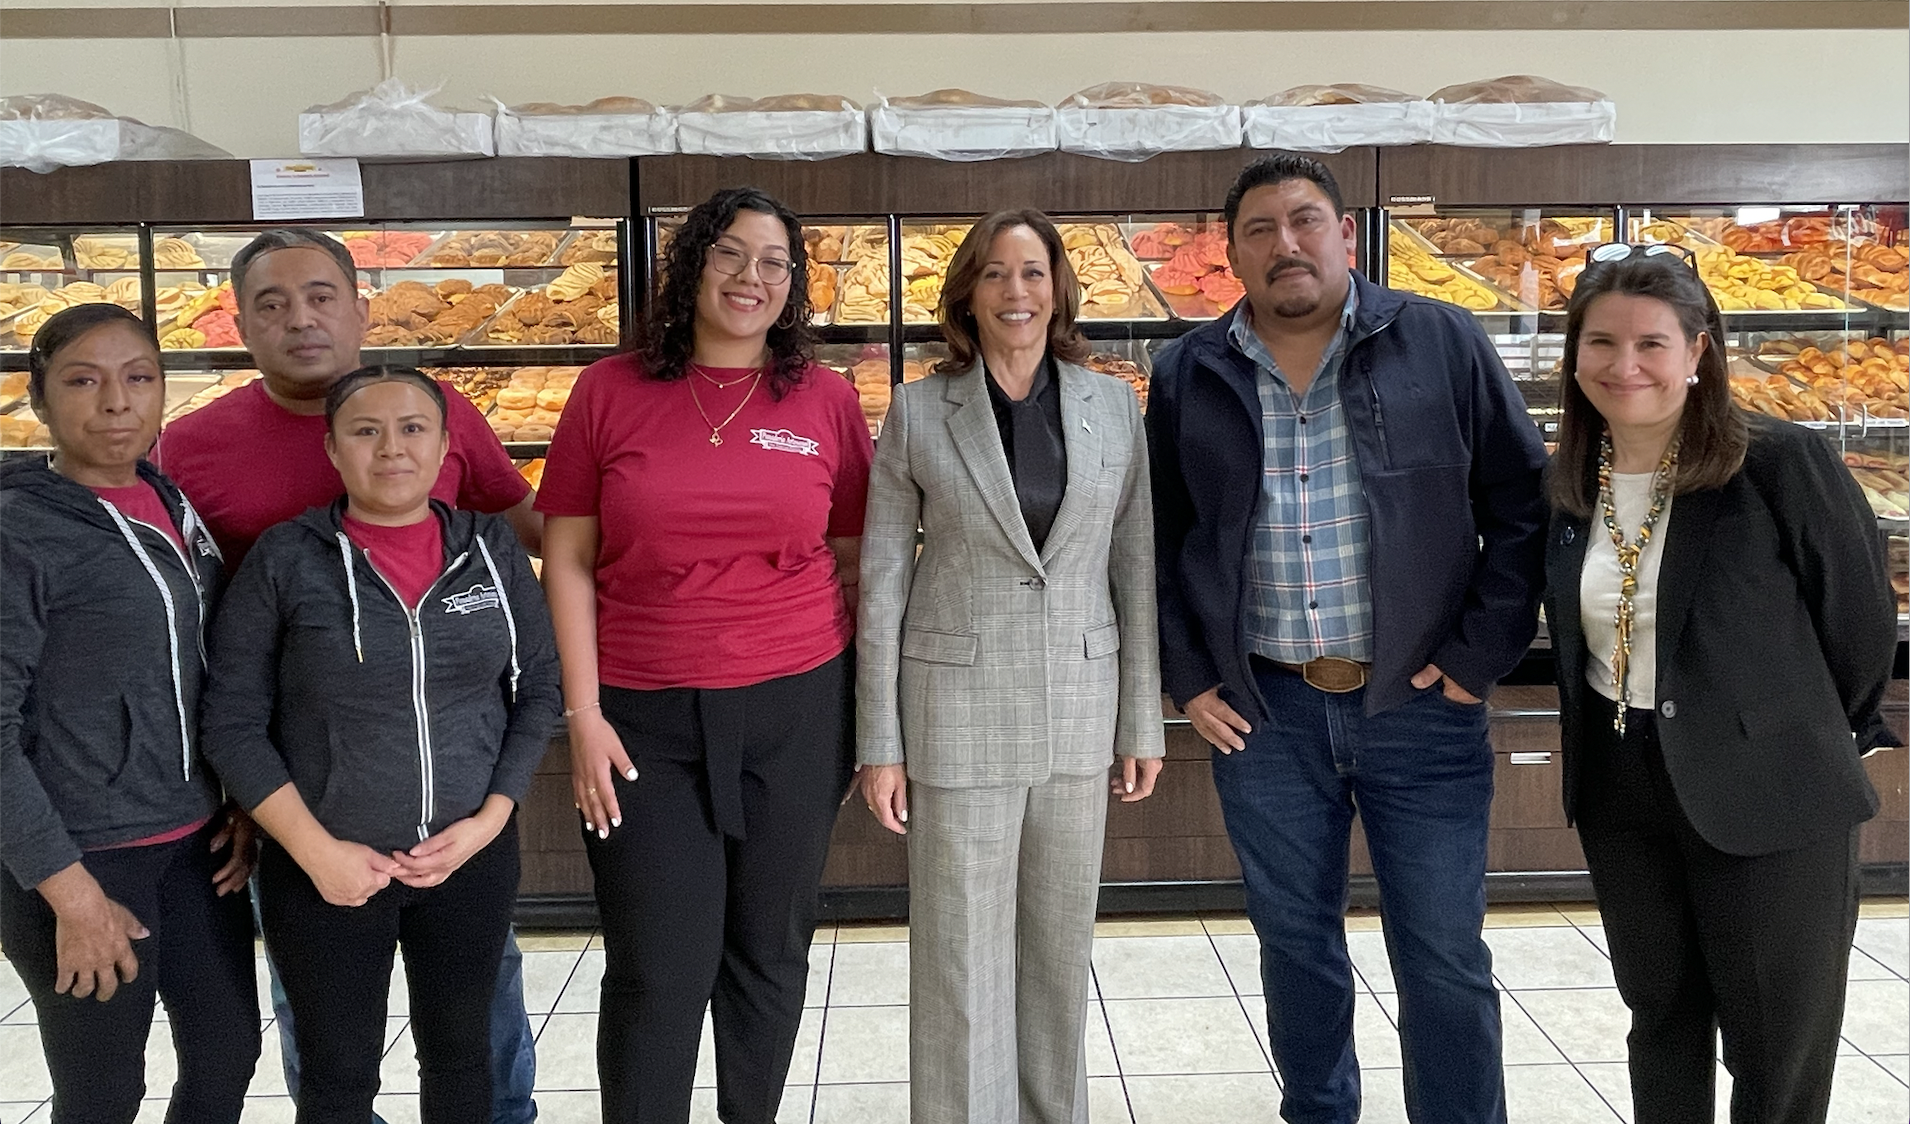 Vice President Kamala Harris with Bakery owners and staff